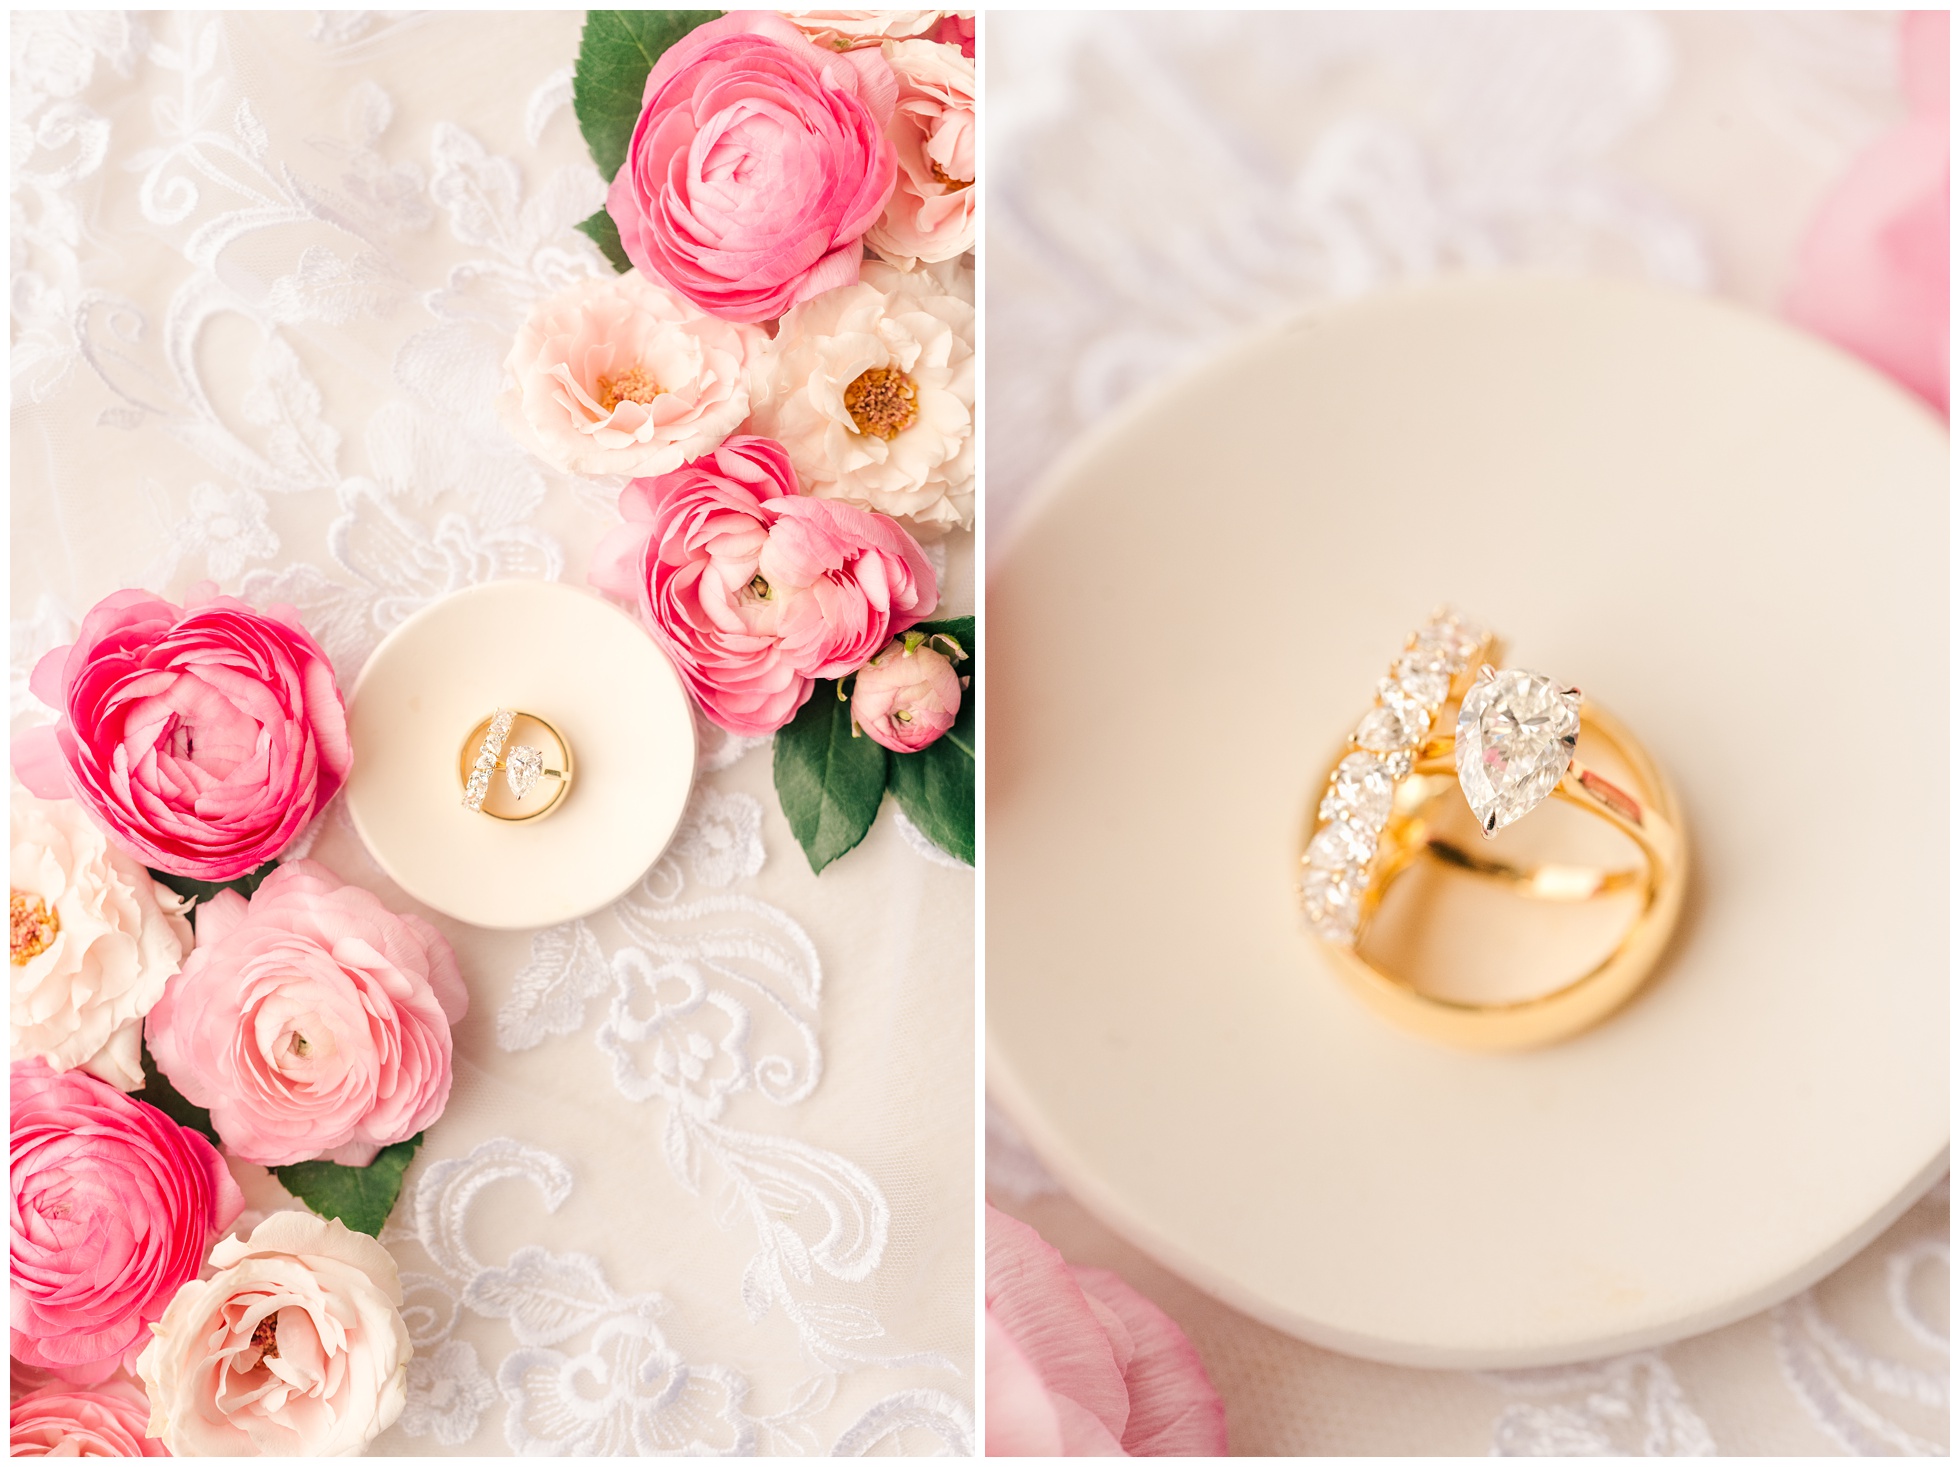 gold Wedding rings styled with pink flowers.